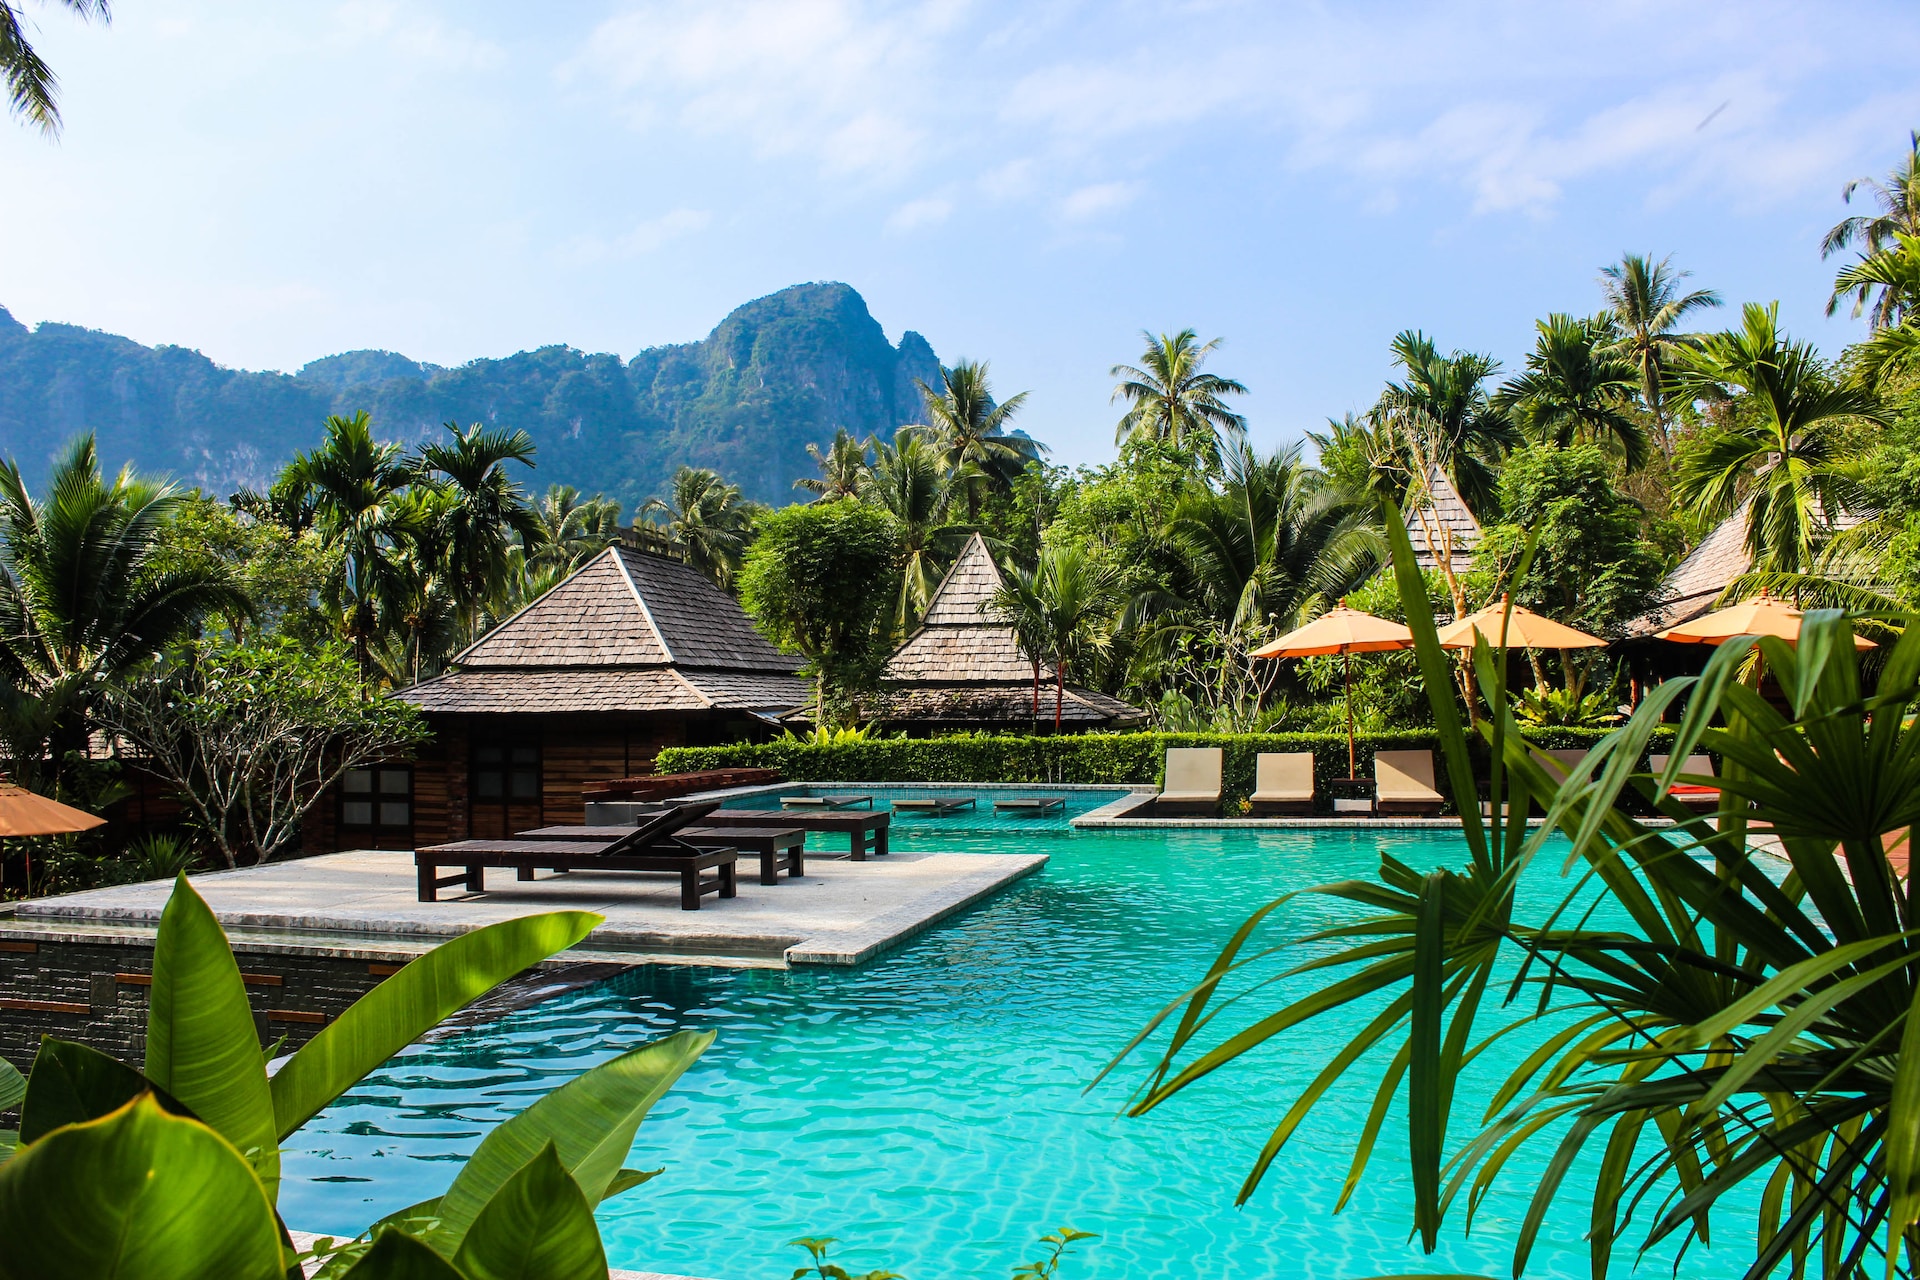 A tropical destination with thatched roofs and aquamarine water.